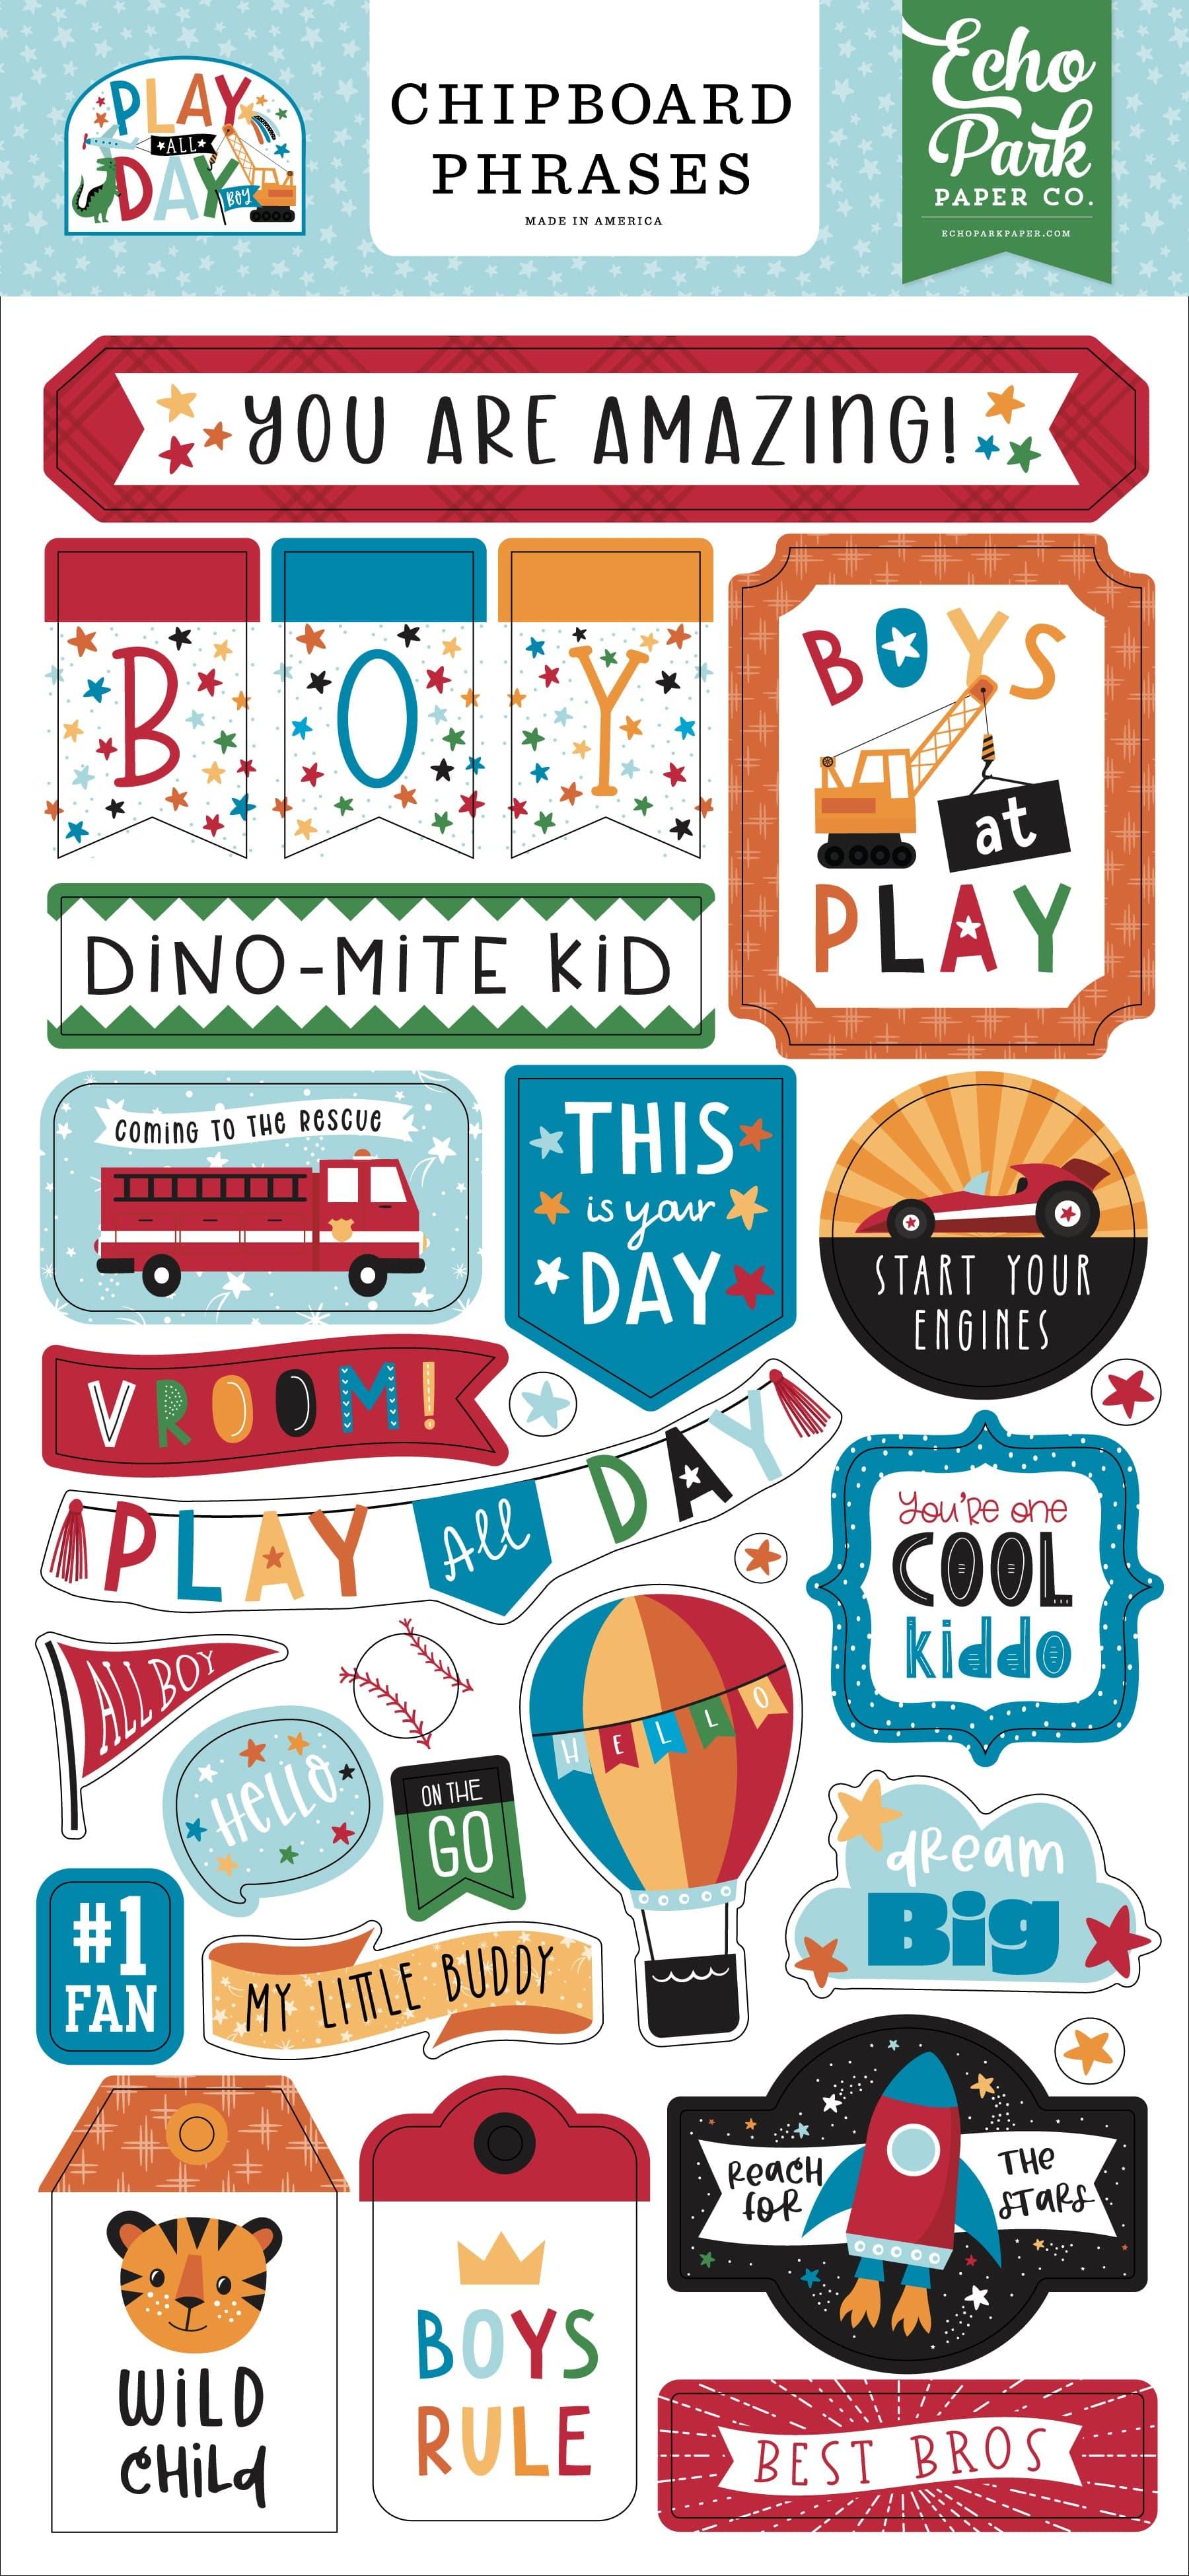 Play All Day Boy Collection 6 x 12 Scrapbook Chipboard Phrases by Echo Park Paper - Scrapbook Supply Companies